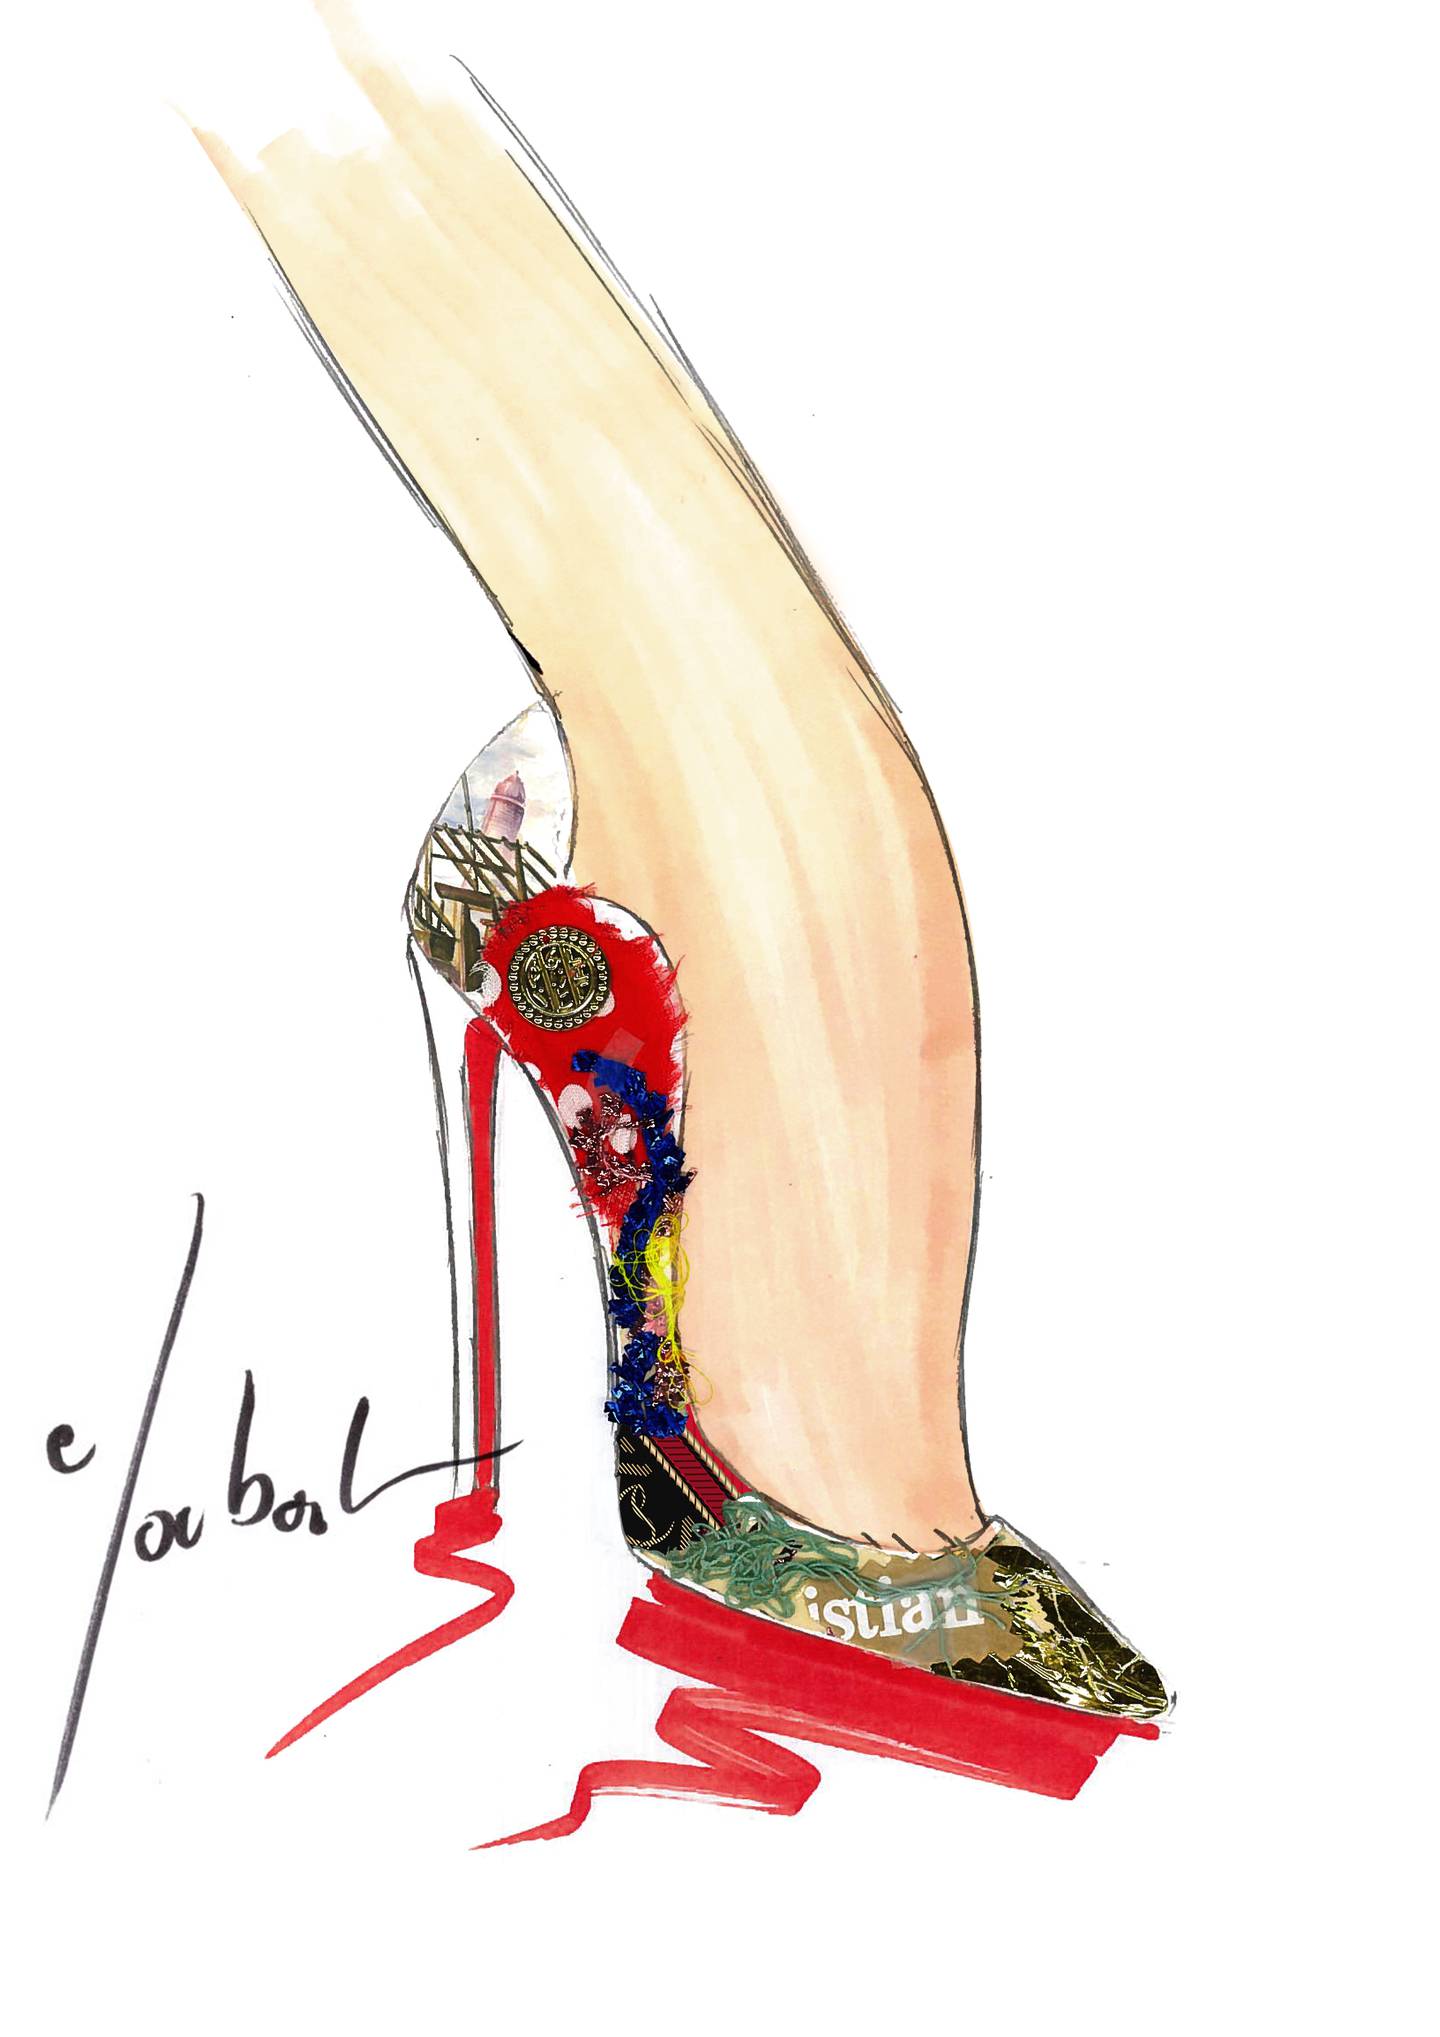 A sketch by Christian Louboutin of the "Hot Chick" shoe, created as part of the  "Golden Capsule" collection made especially for the UAE's 50th National Day. Courtesy Louboutin